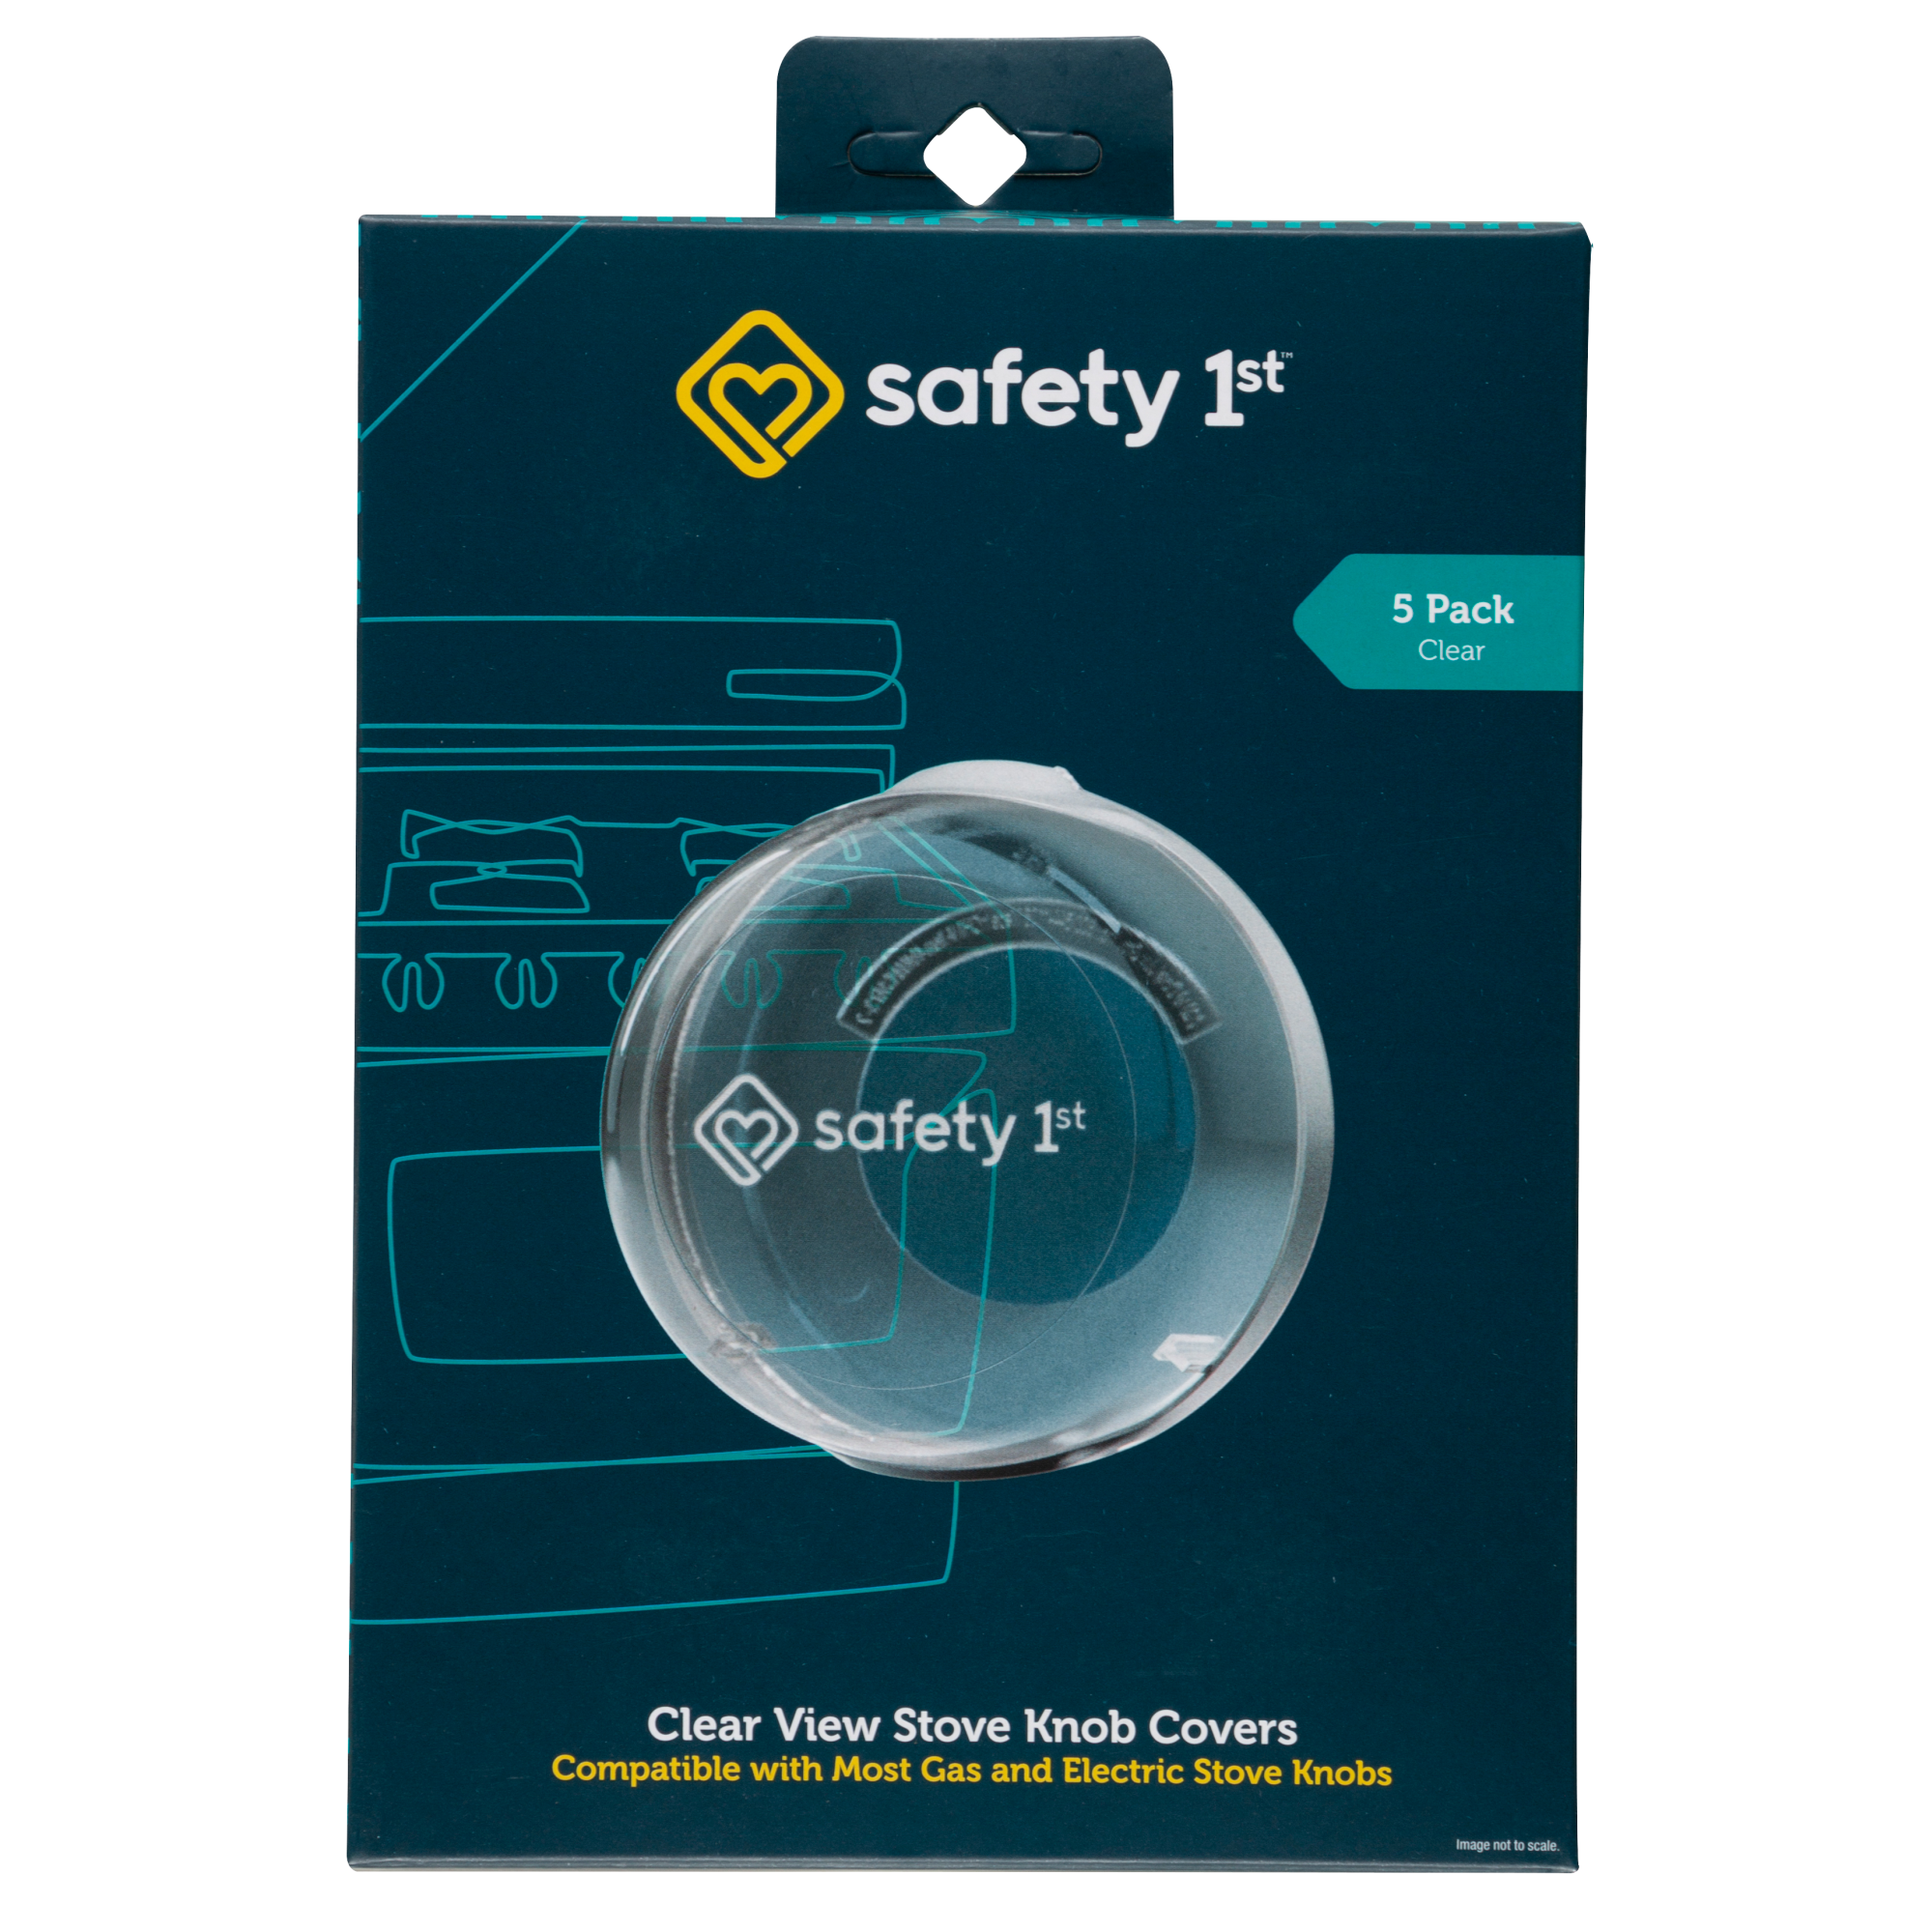 Clear View Stove Knob Covers in packaging - compatible with most gas and electric stove knobs